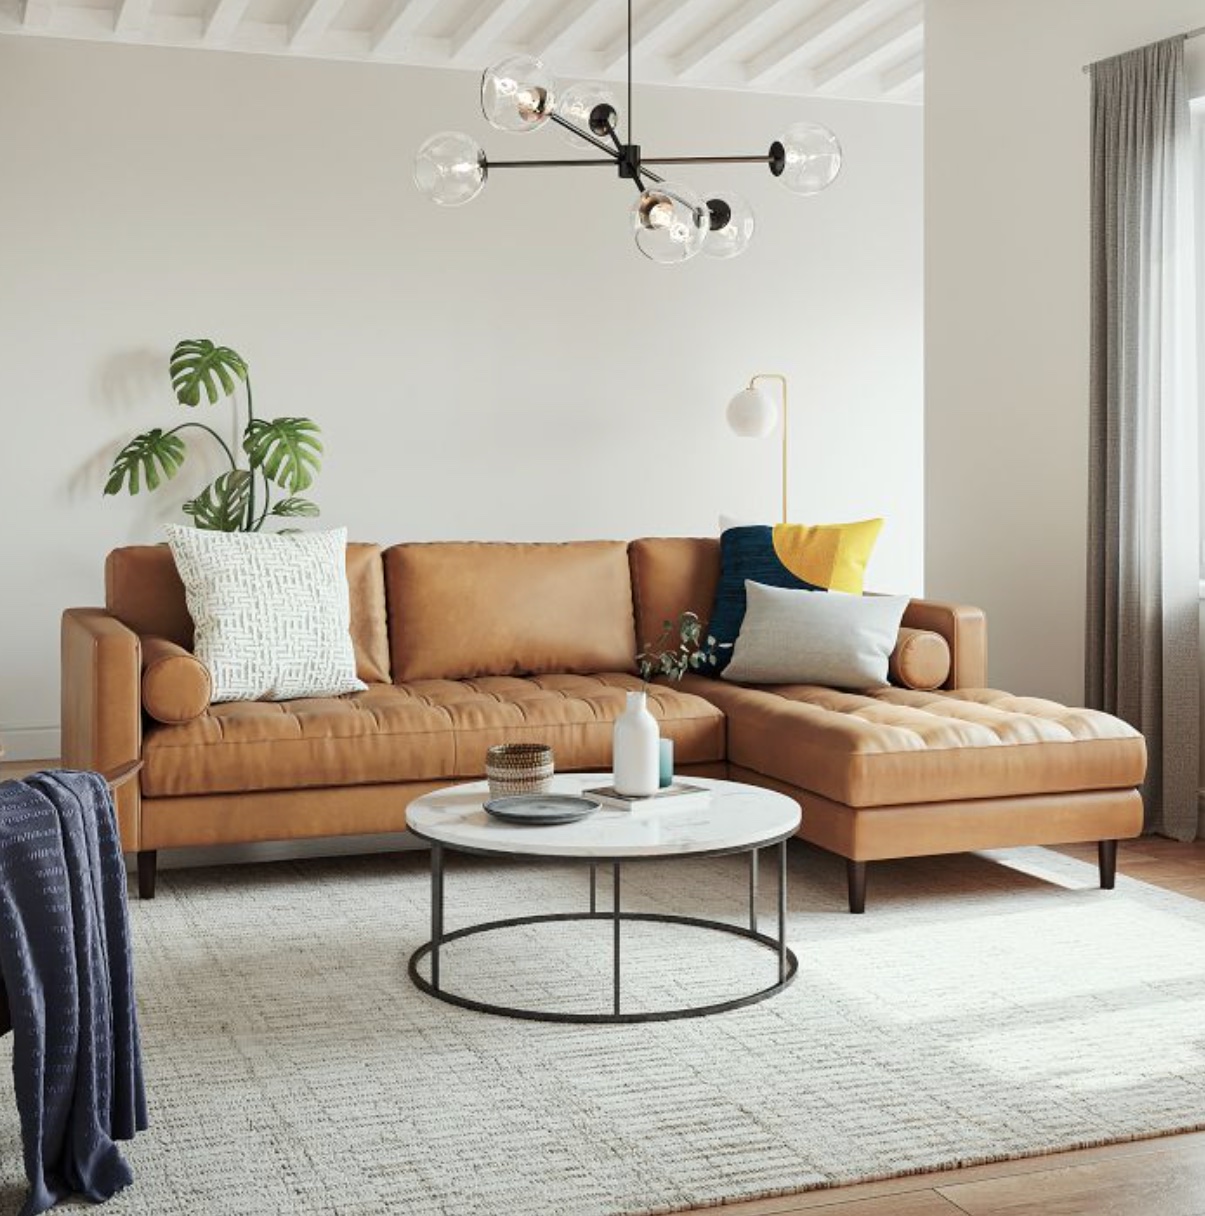 A West Elm Couch in a styled living room.